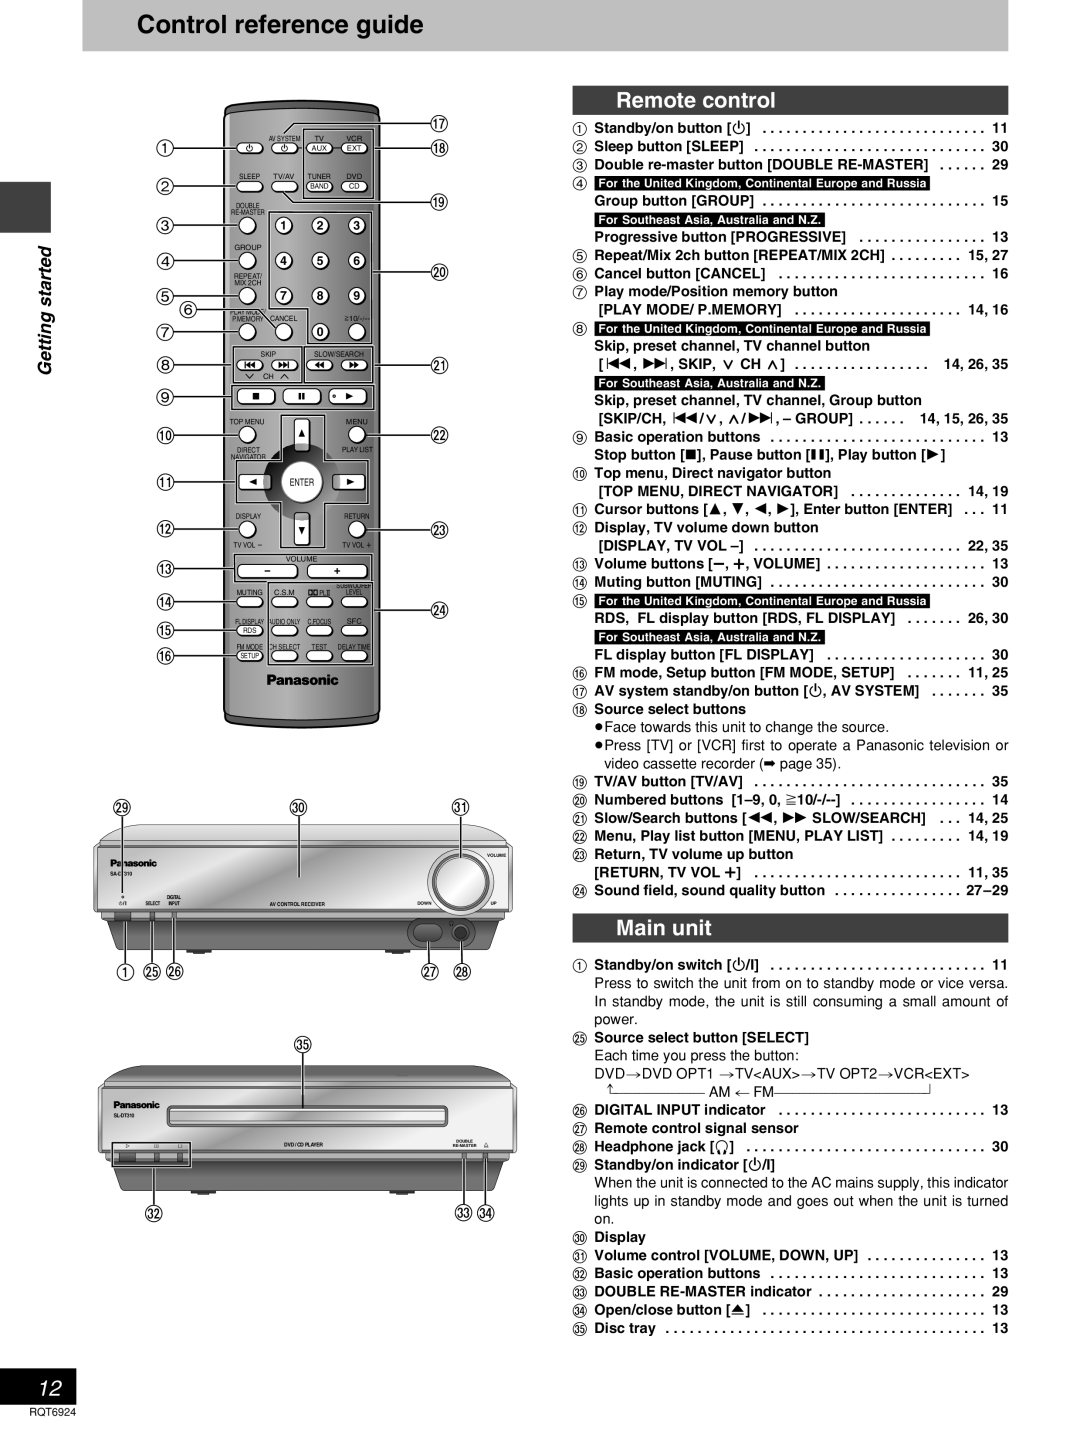 Panasonic SC-DT310 manual Control reference guide, Remote control, Main unit, started, Getting 